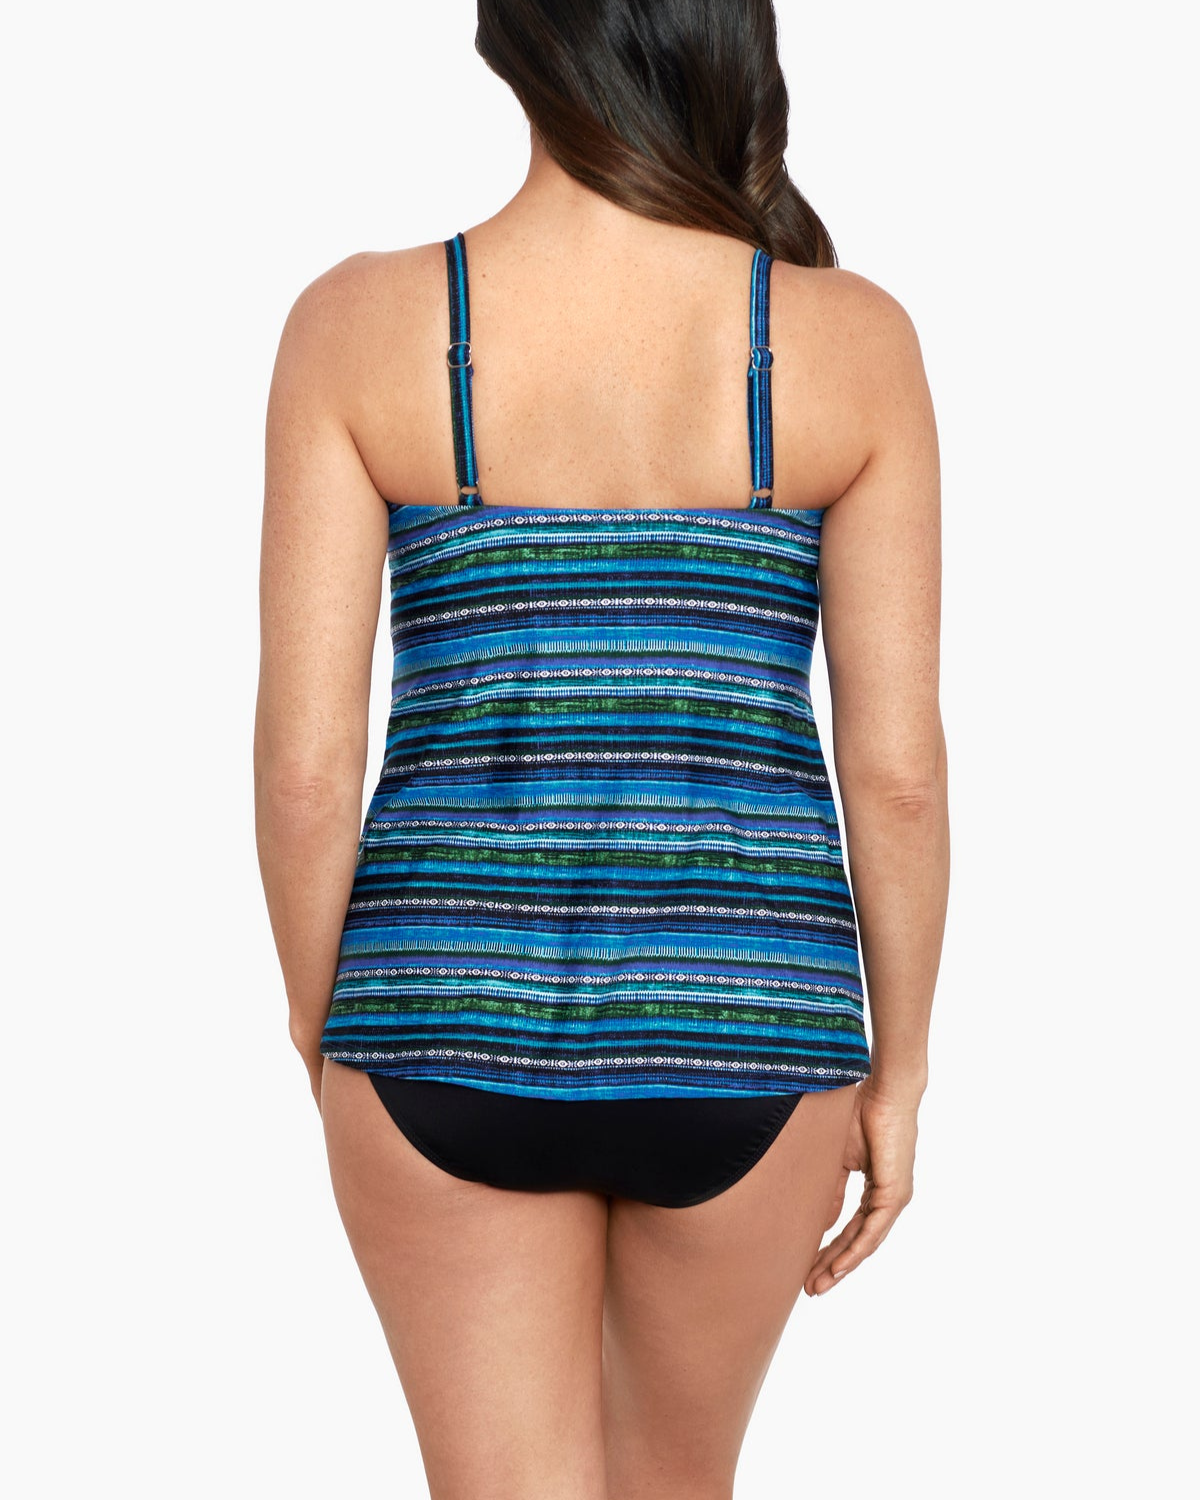 Model wearing a striped tankini top in multiple shades of blue